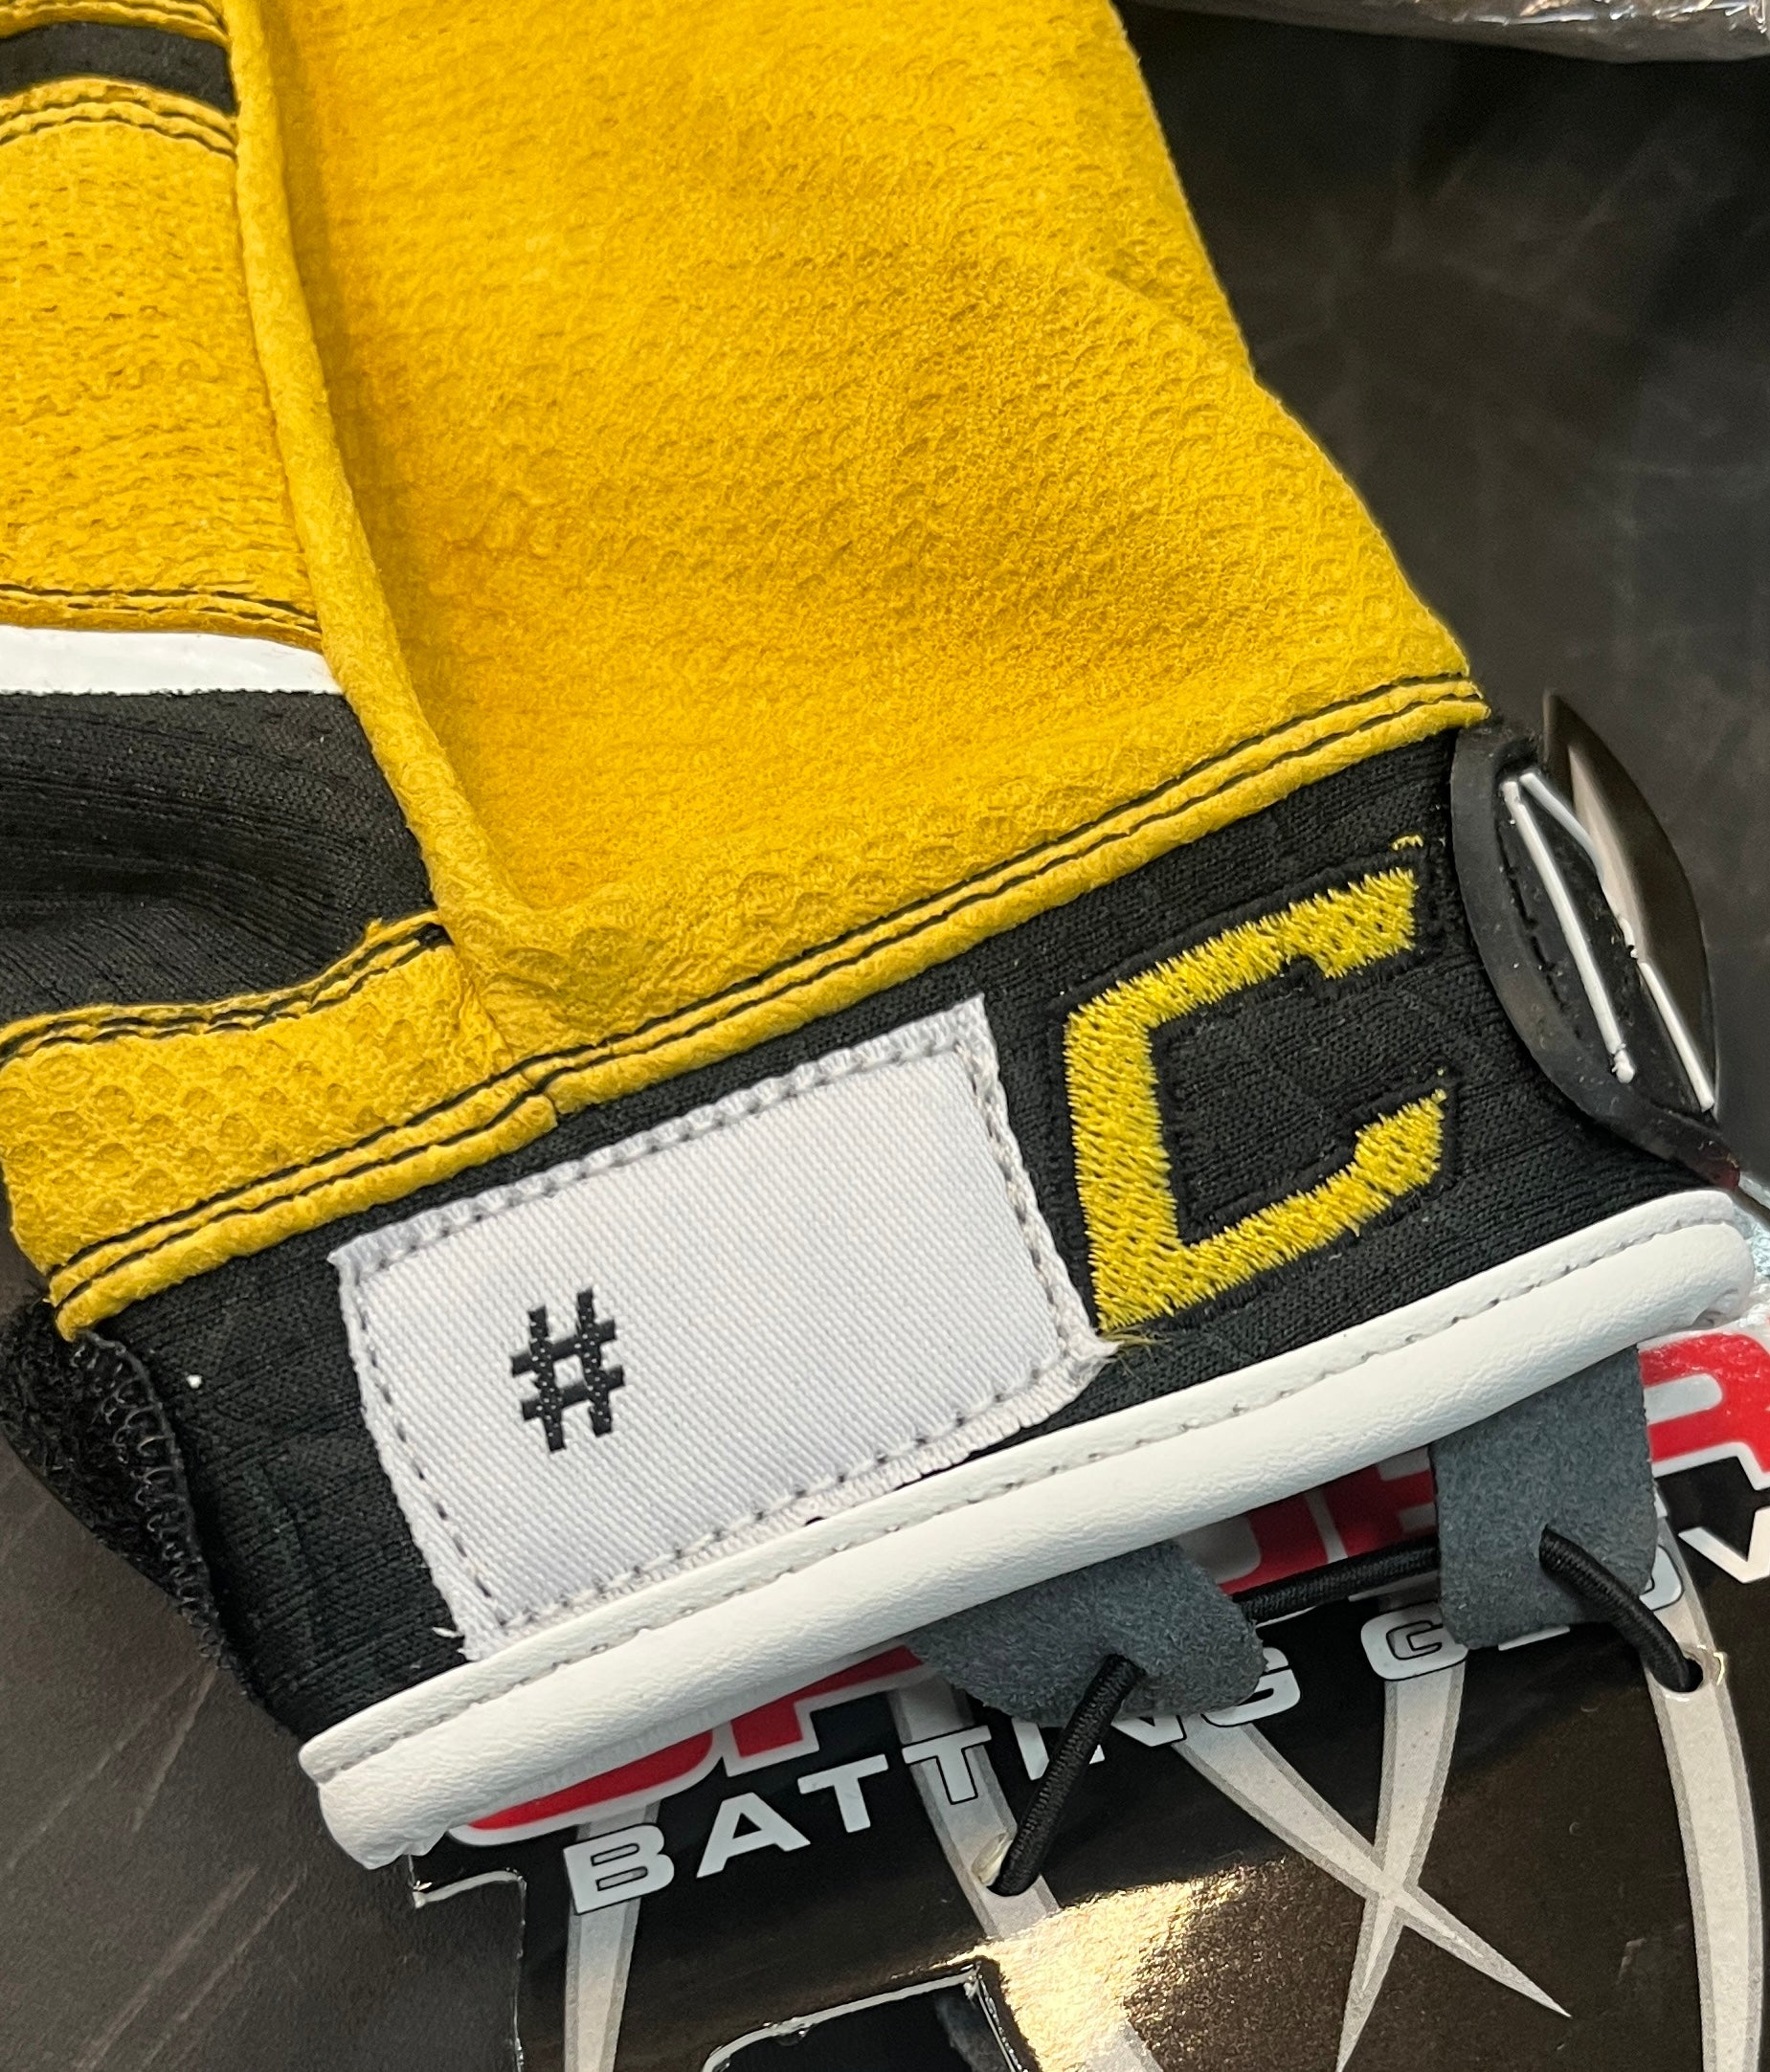 '24 Spiderz Pro Batting Gloves - CANES Limited Edition